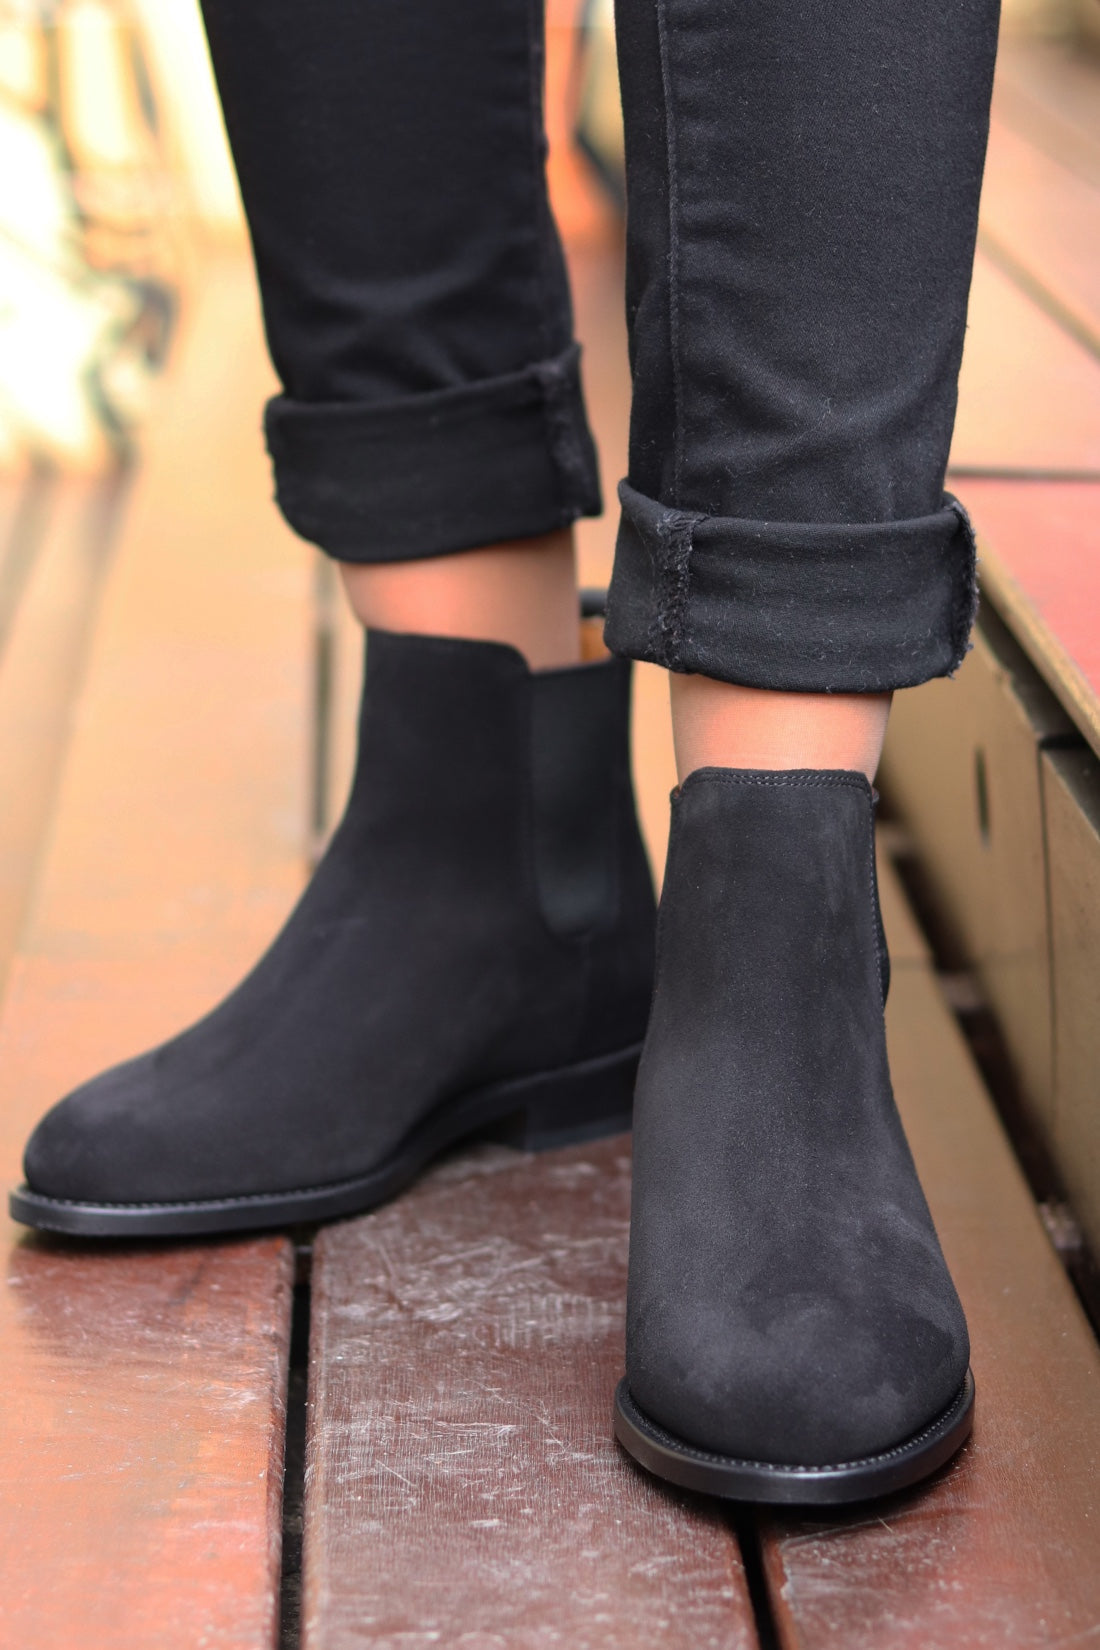 Women's Black Boots, Welted Leather Sole - Hugs Co.